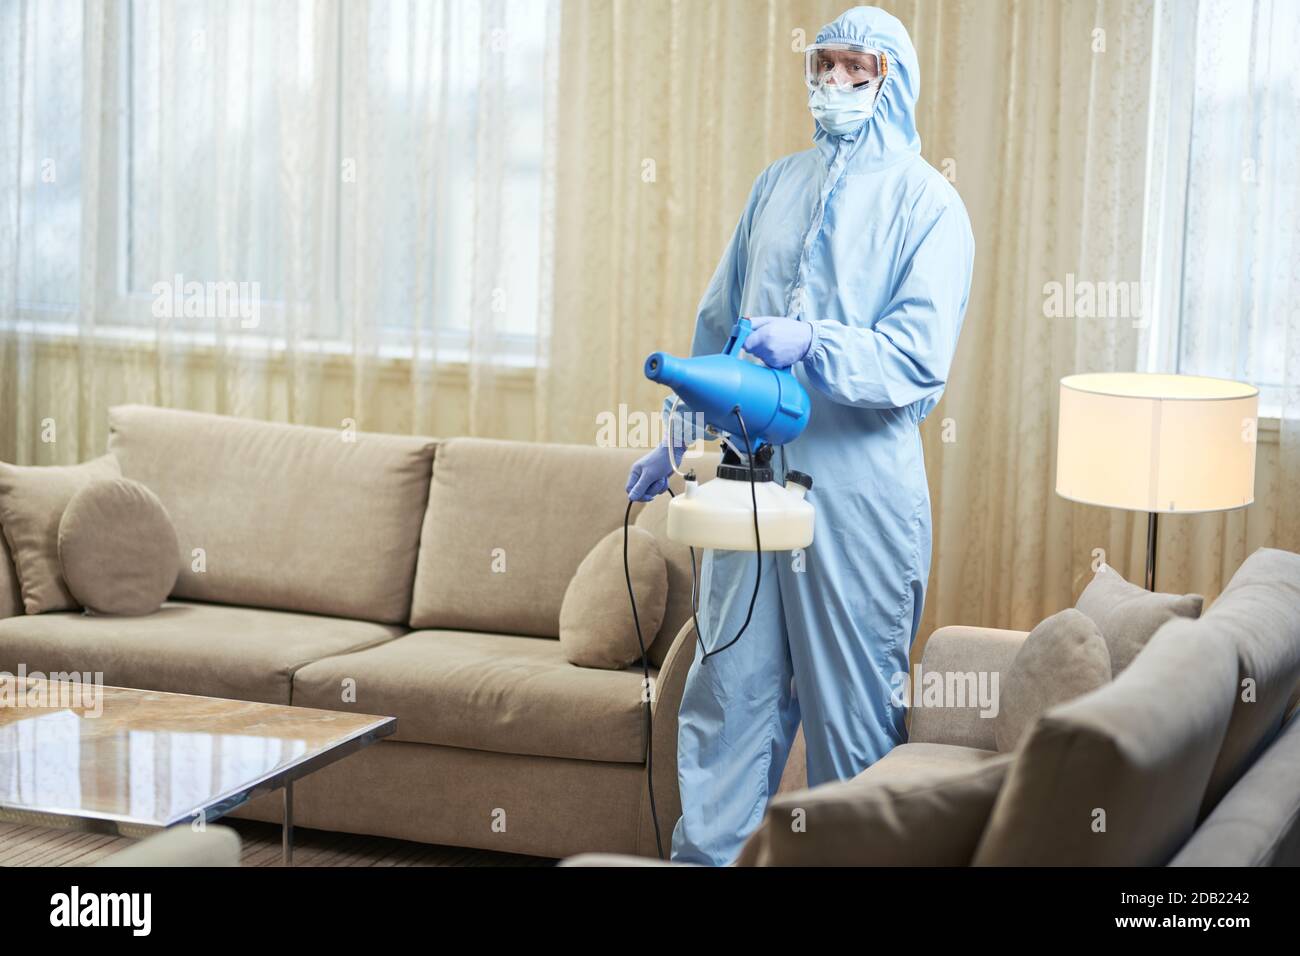 Worker wearing protective suit and glasses standing in hotel room and using disinfectant. Coronavirus and quarantine concept Stock Photo